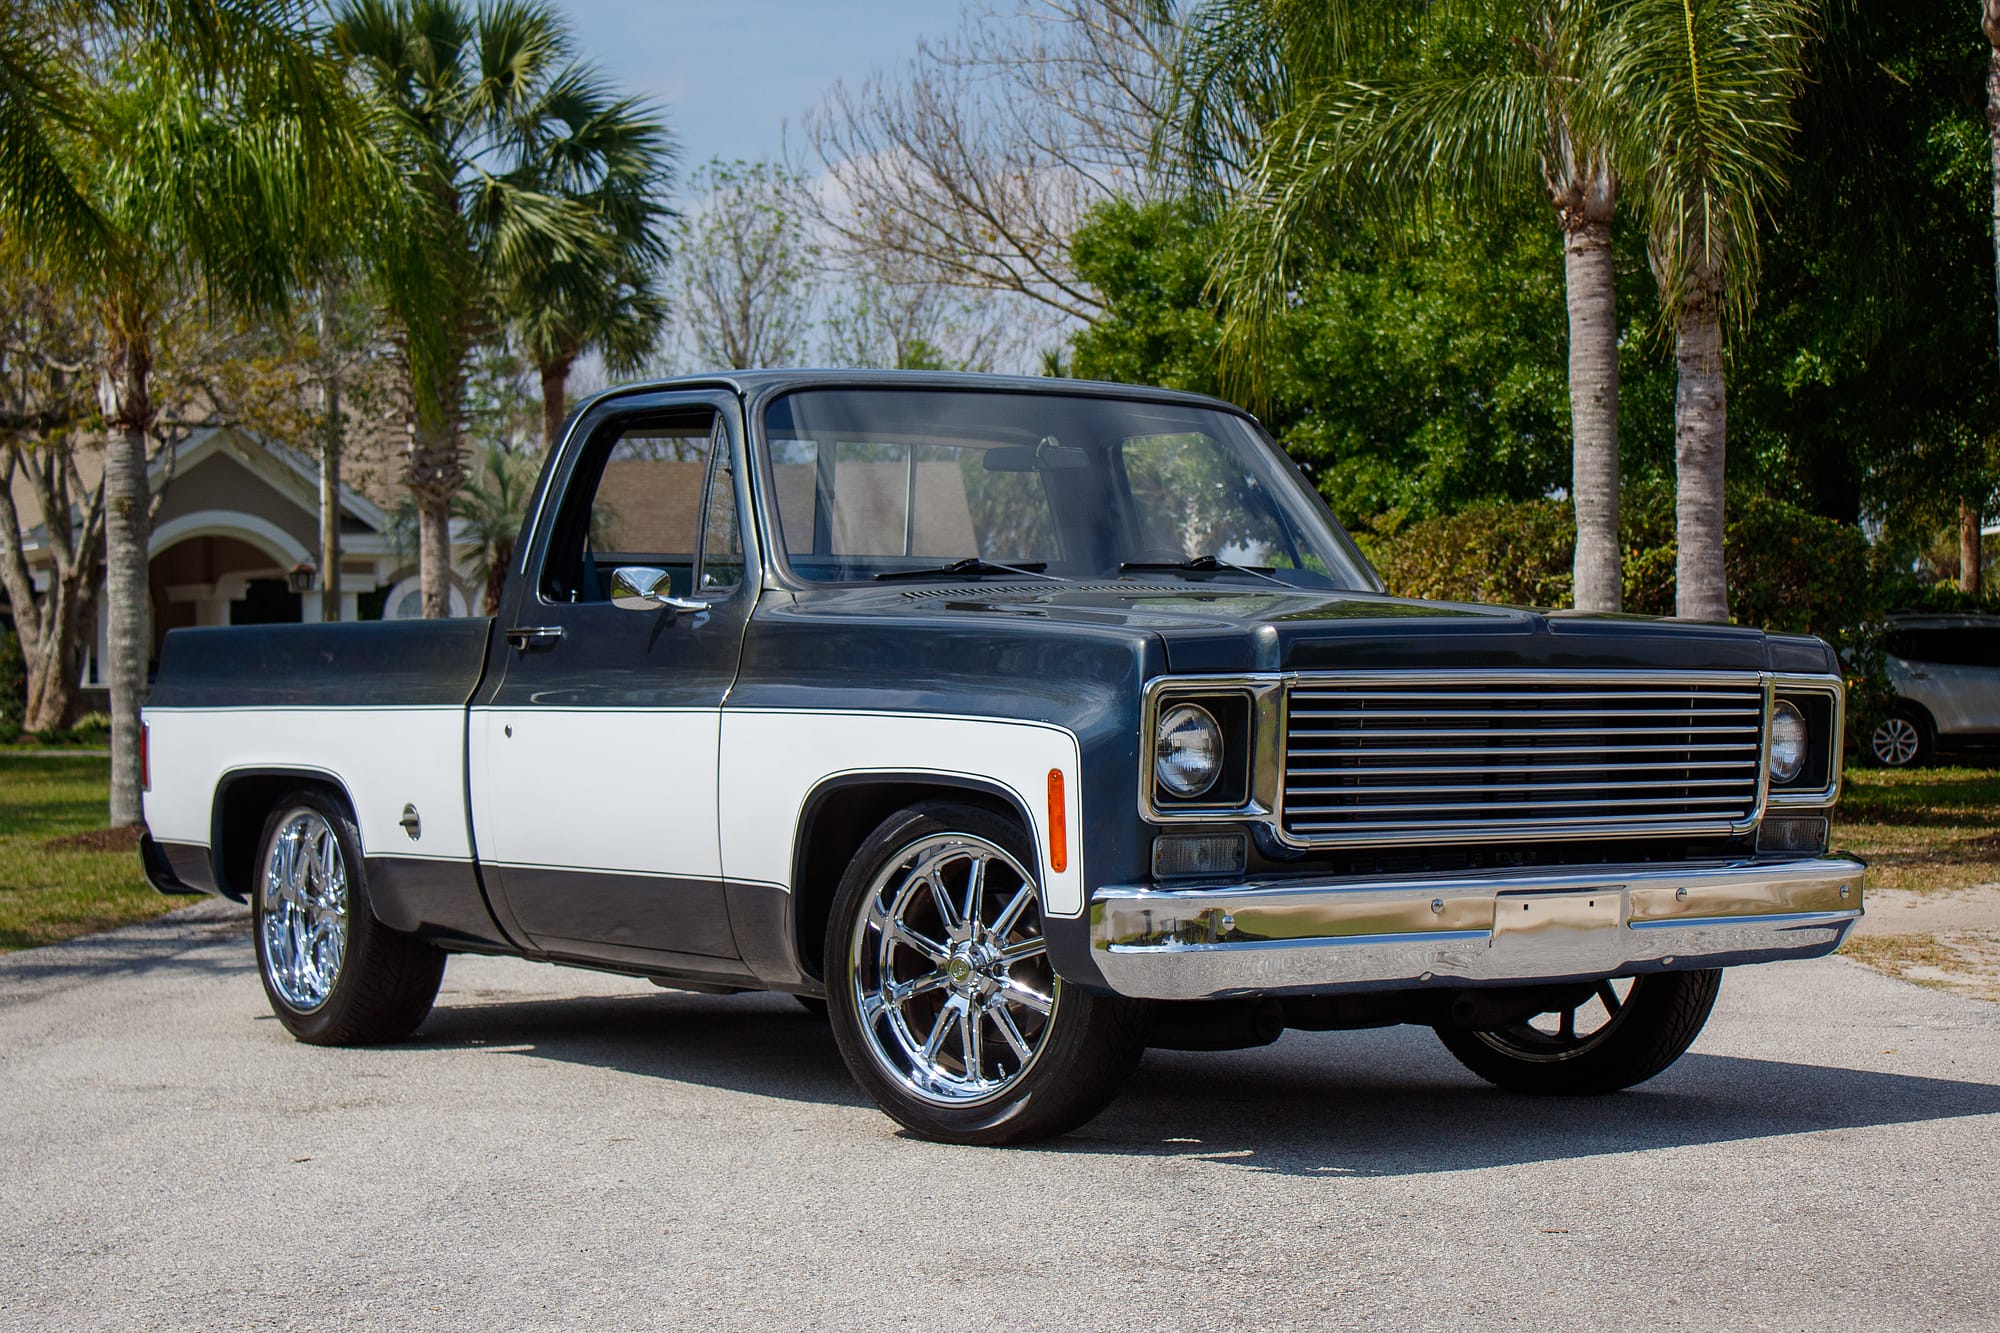 1977 Chevy C 10 Shortbed 305 SBC Power Steering 8